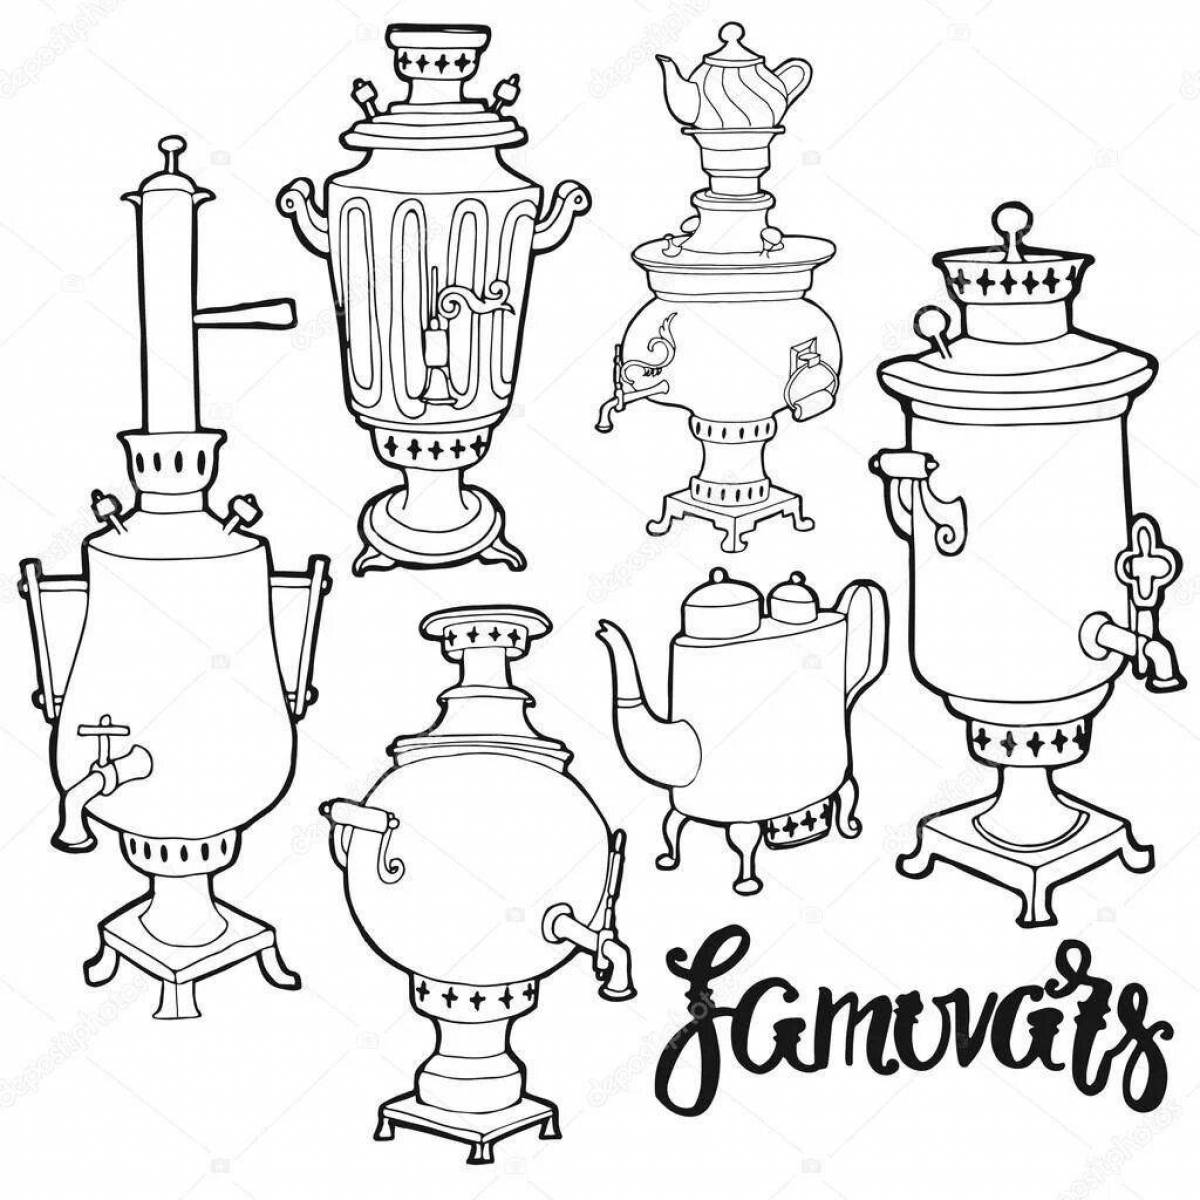 Great drawing of a samovar